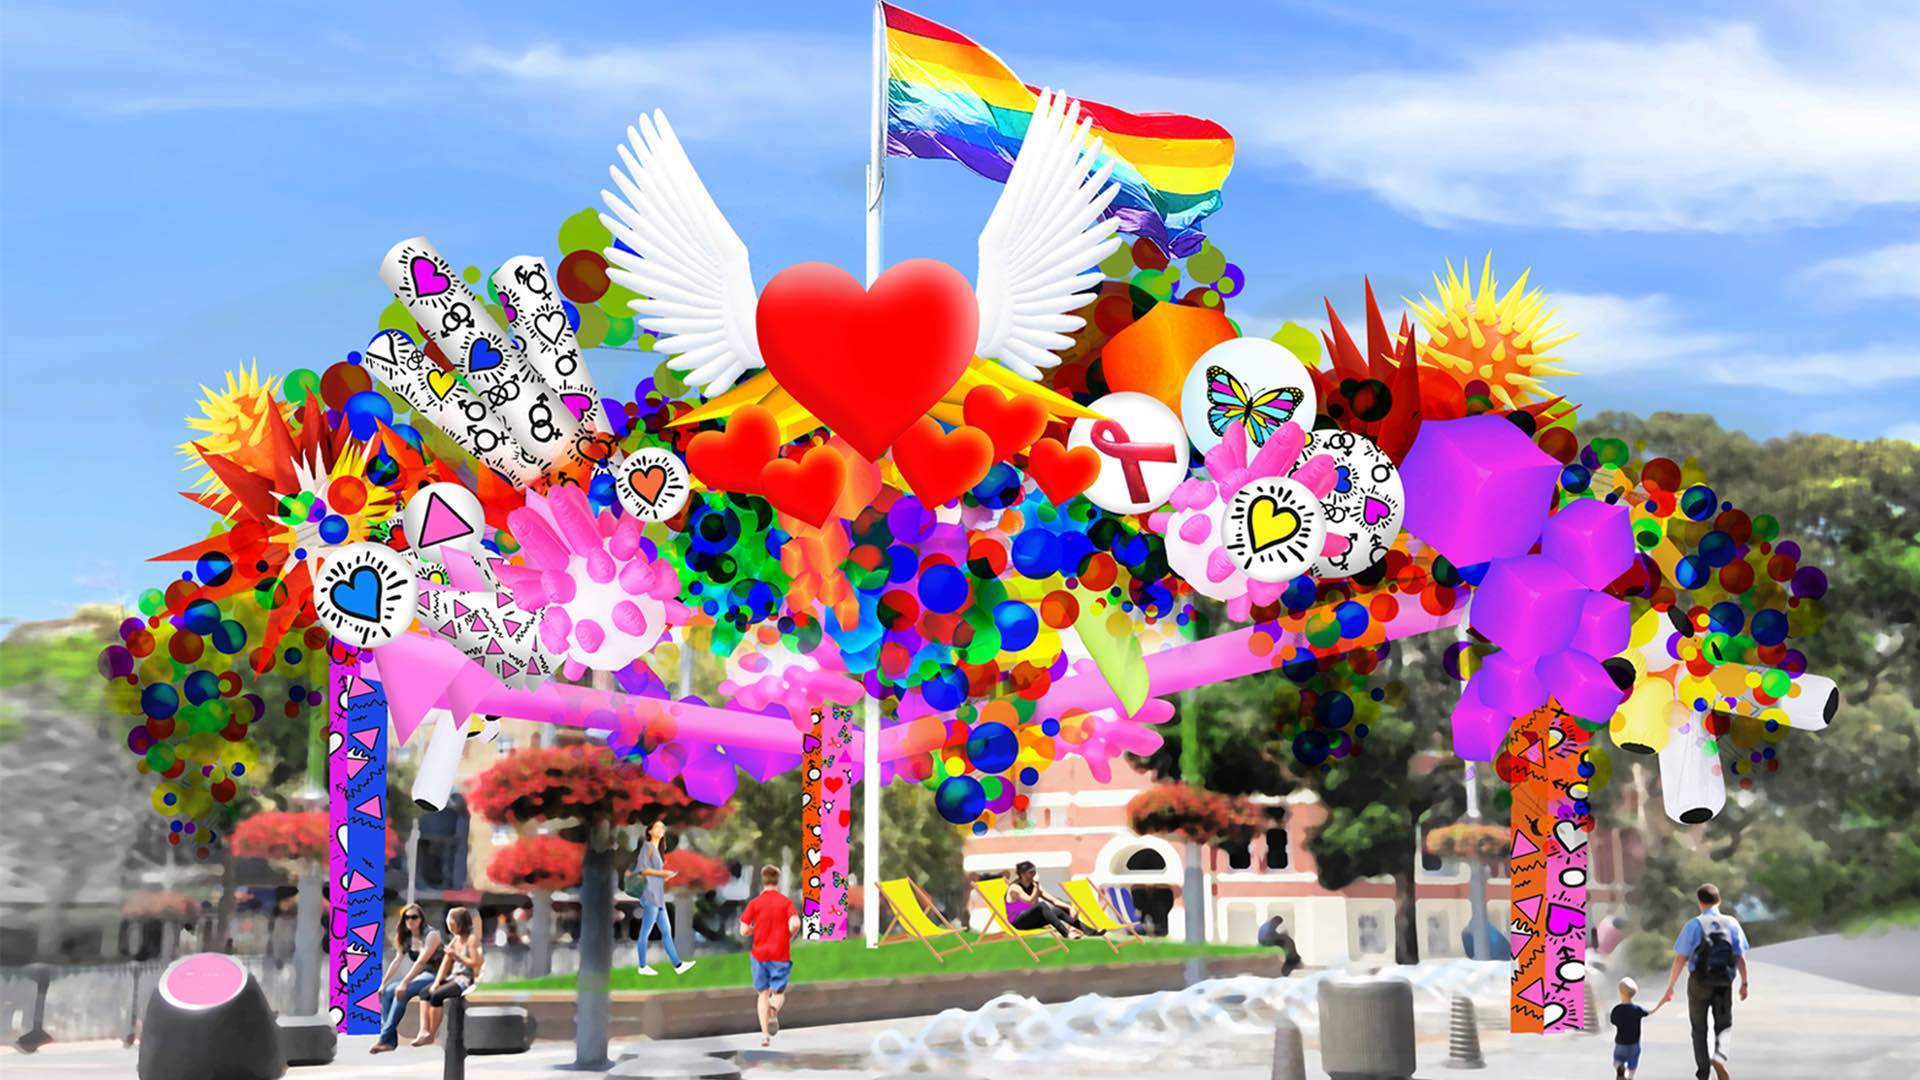 Taylor Square Is Getting a Flamboyant Inflatable Art Installation to Commemorate Mardi Gras